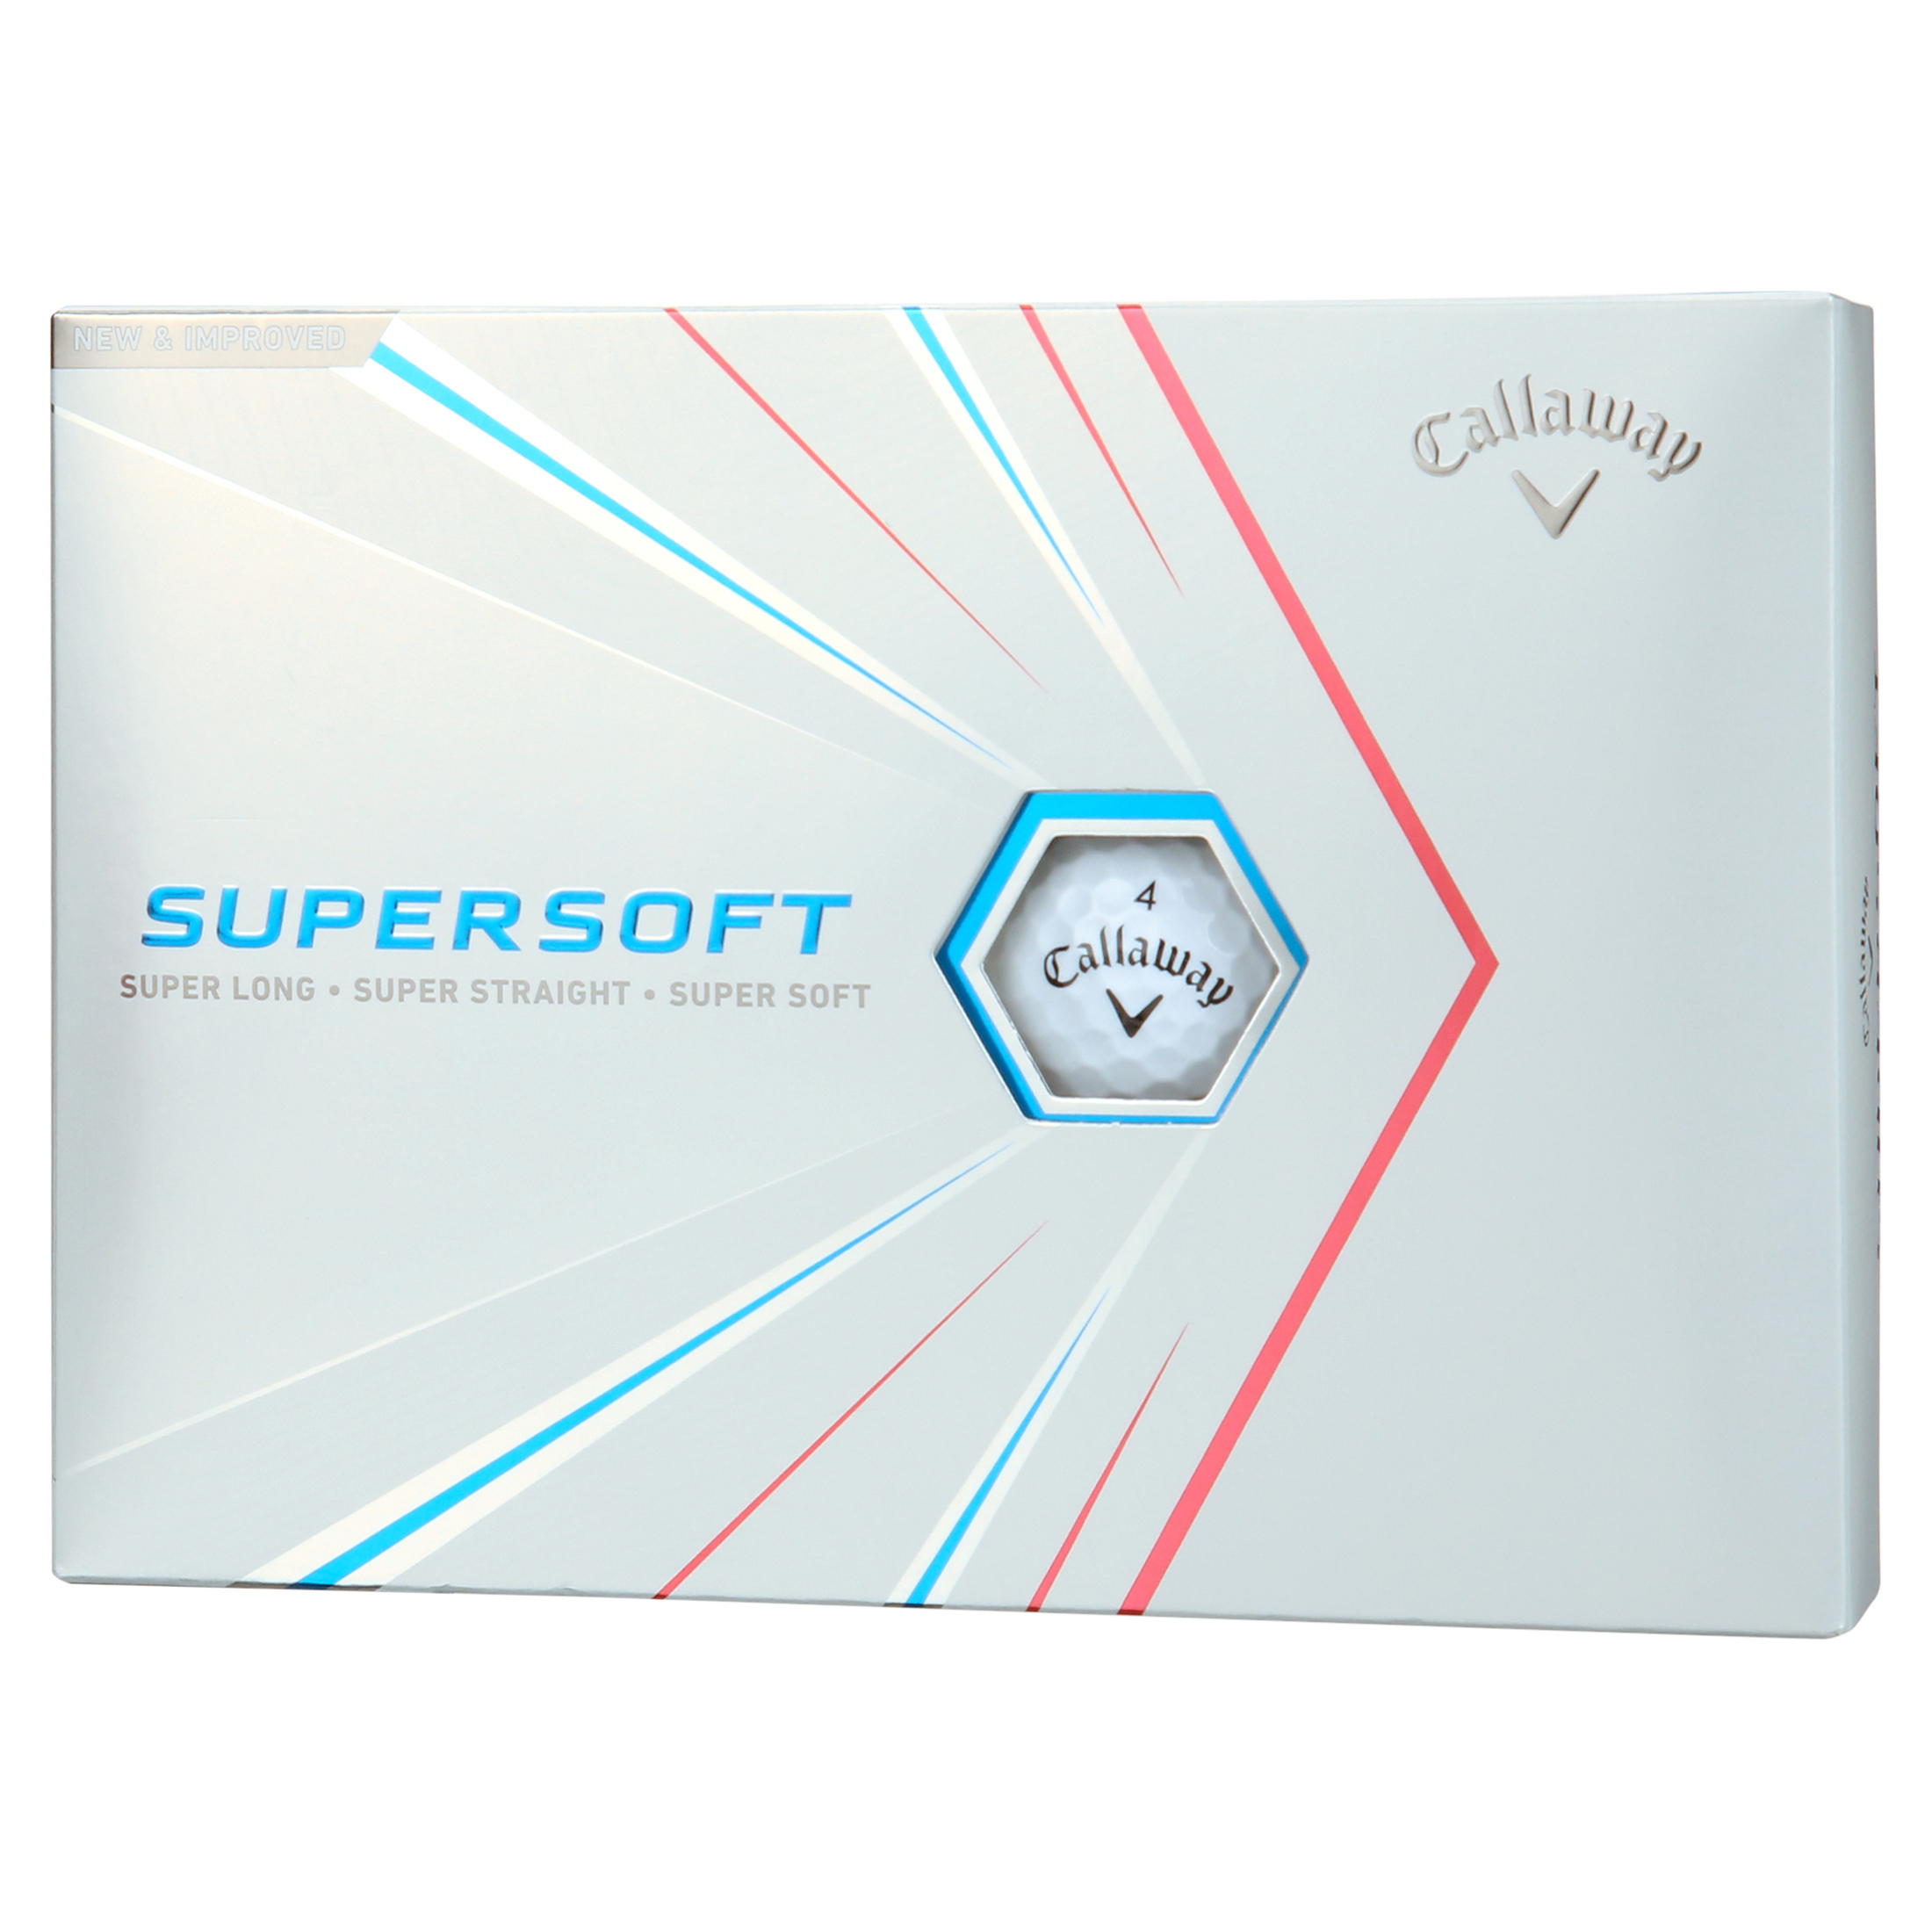 Callaway Supersoft 2021 Golf Balls, White, 12 Pack - image 5 of 6